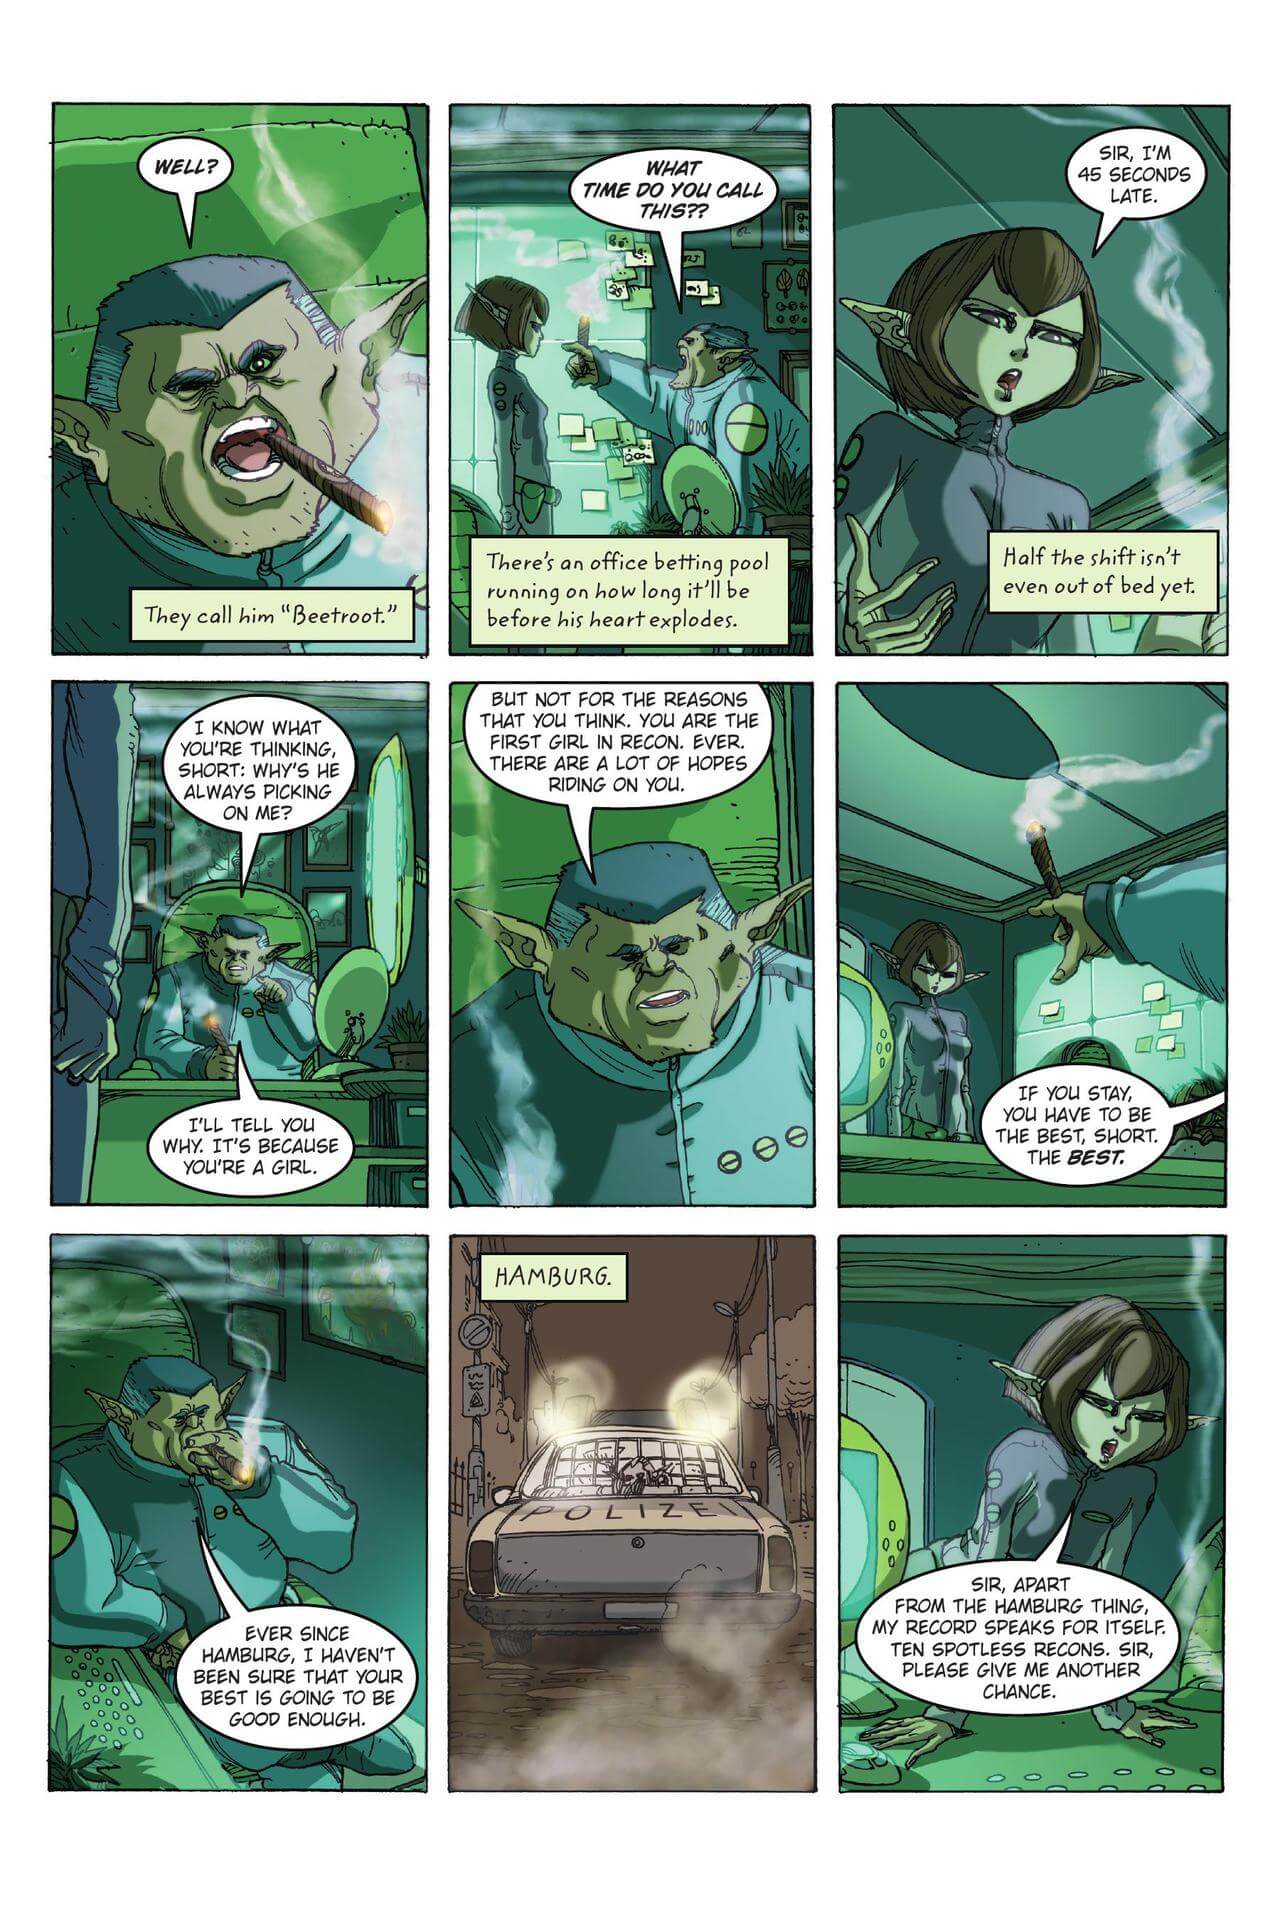 page 21 of artemis fowl the graphic novel